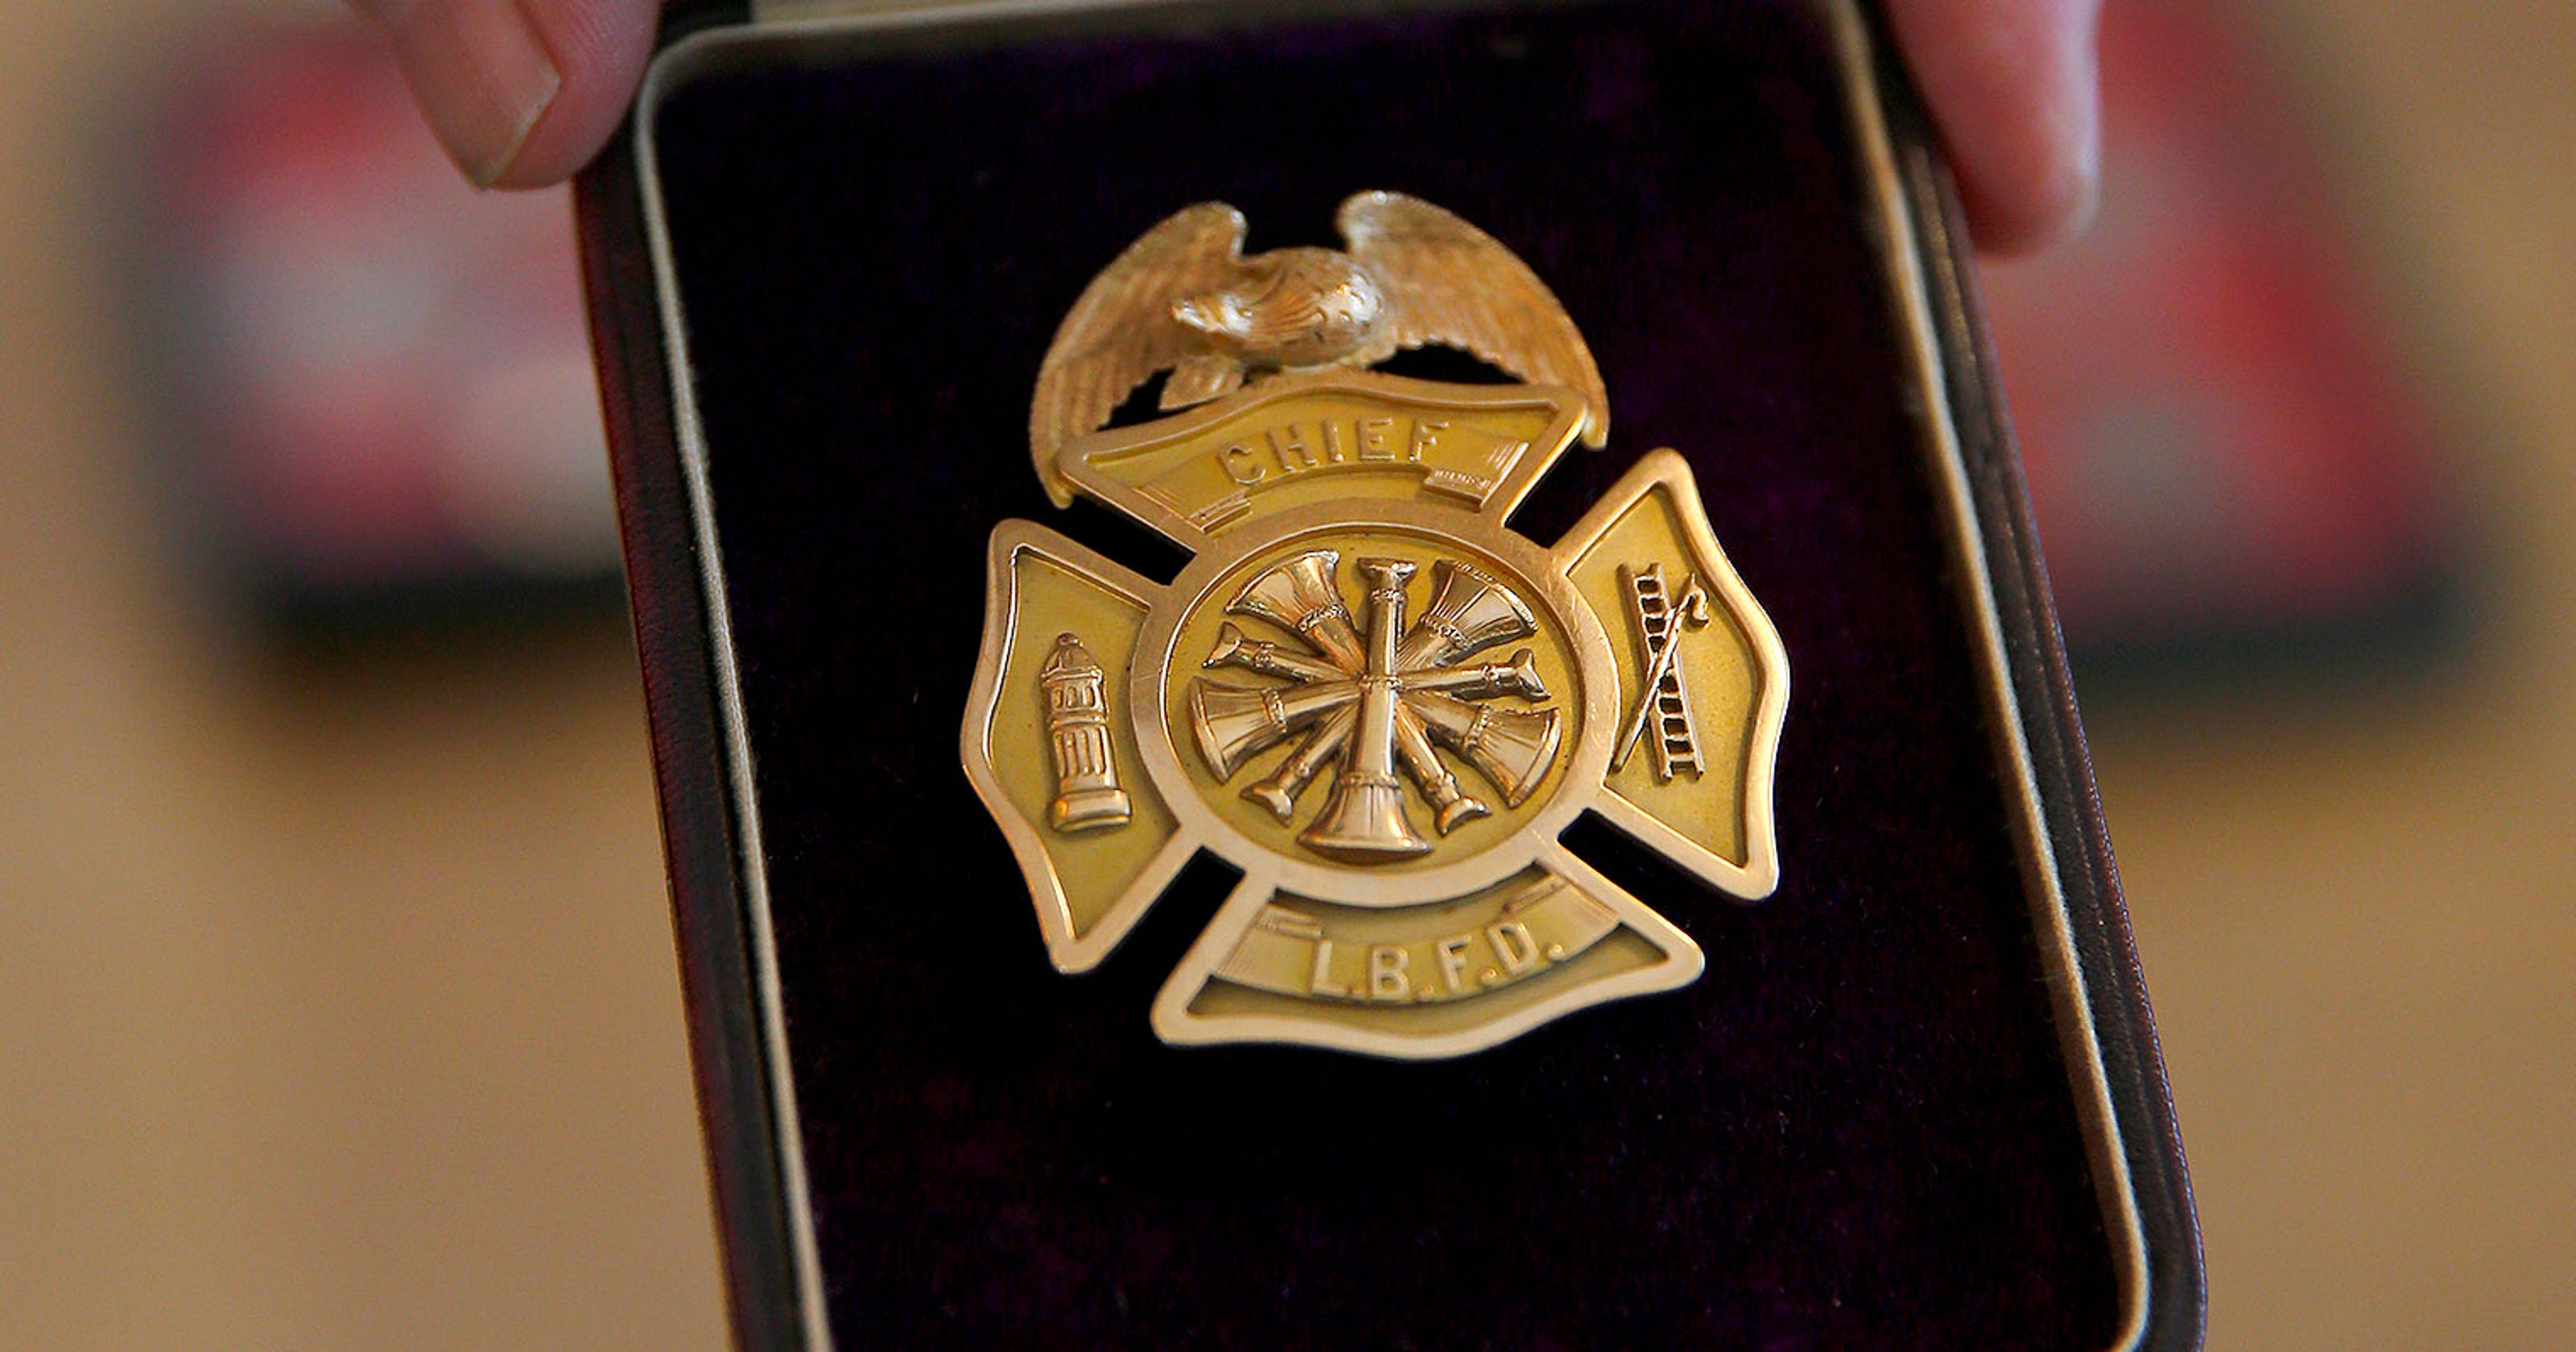 1902-long-branch-fire-chief-badge-sold-family-mystified